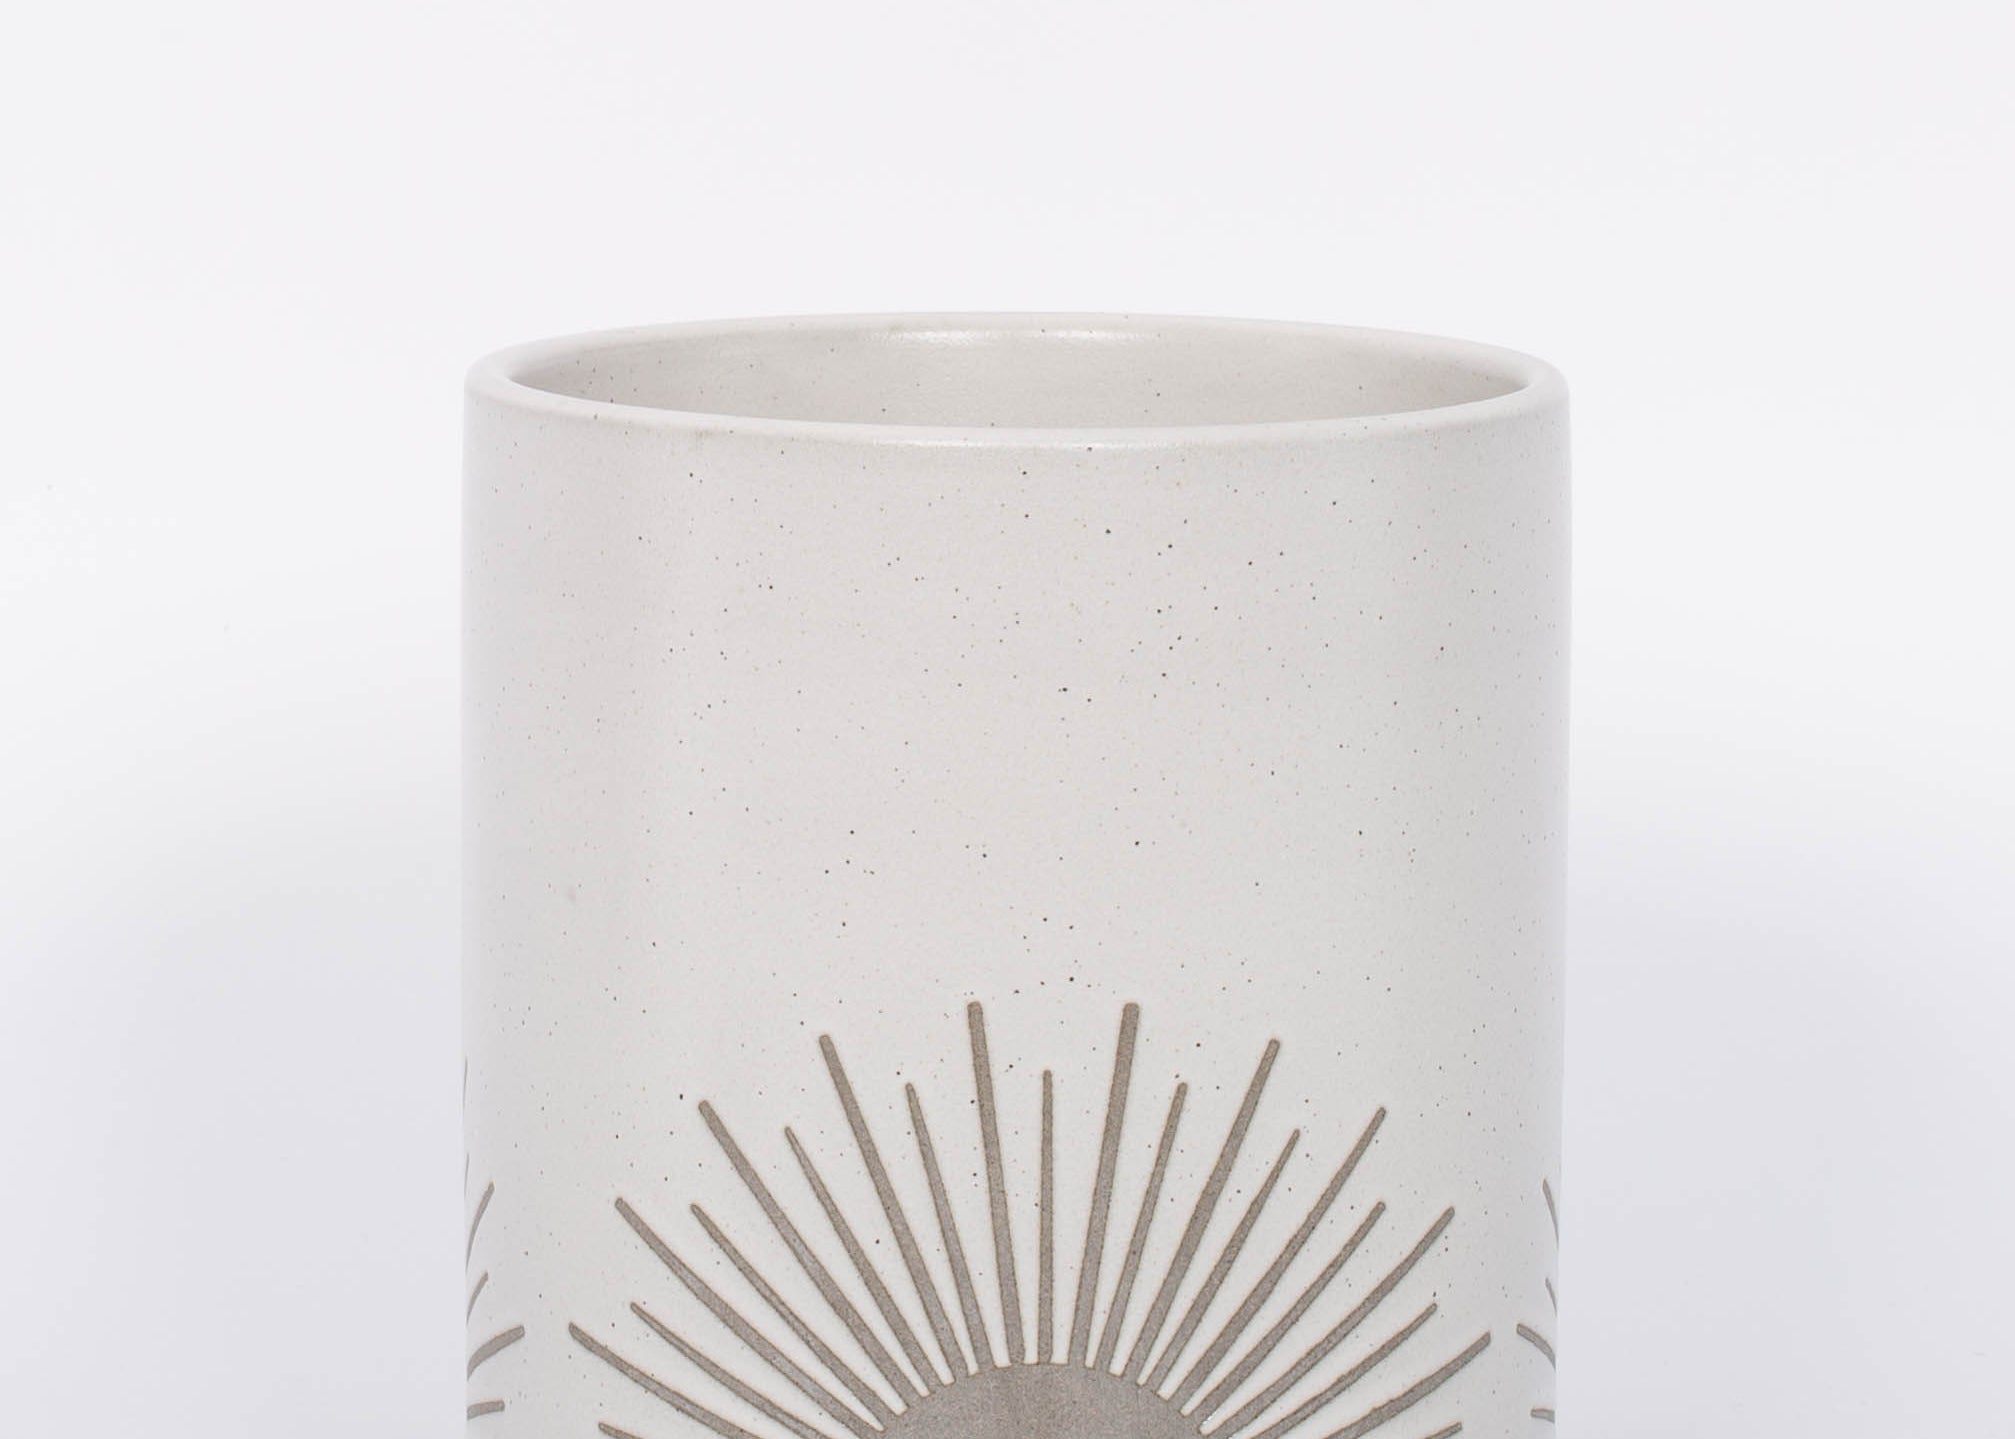 Small half sun Sunrise to Sunset planter Pot by Citrine with golden sun design on natural white. 